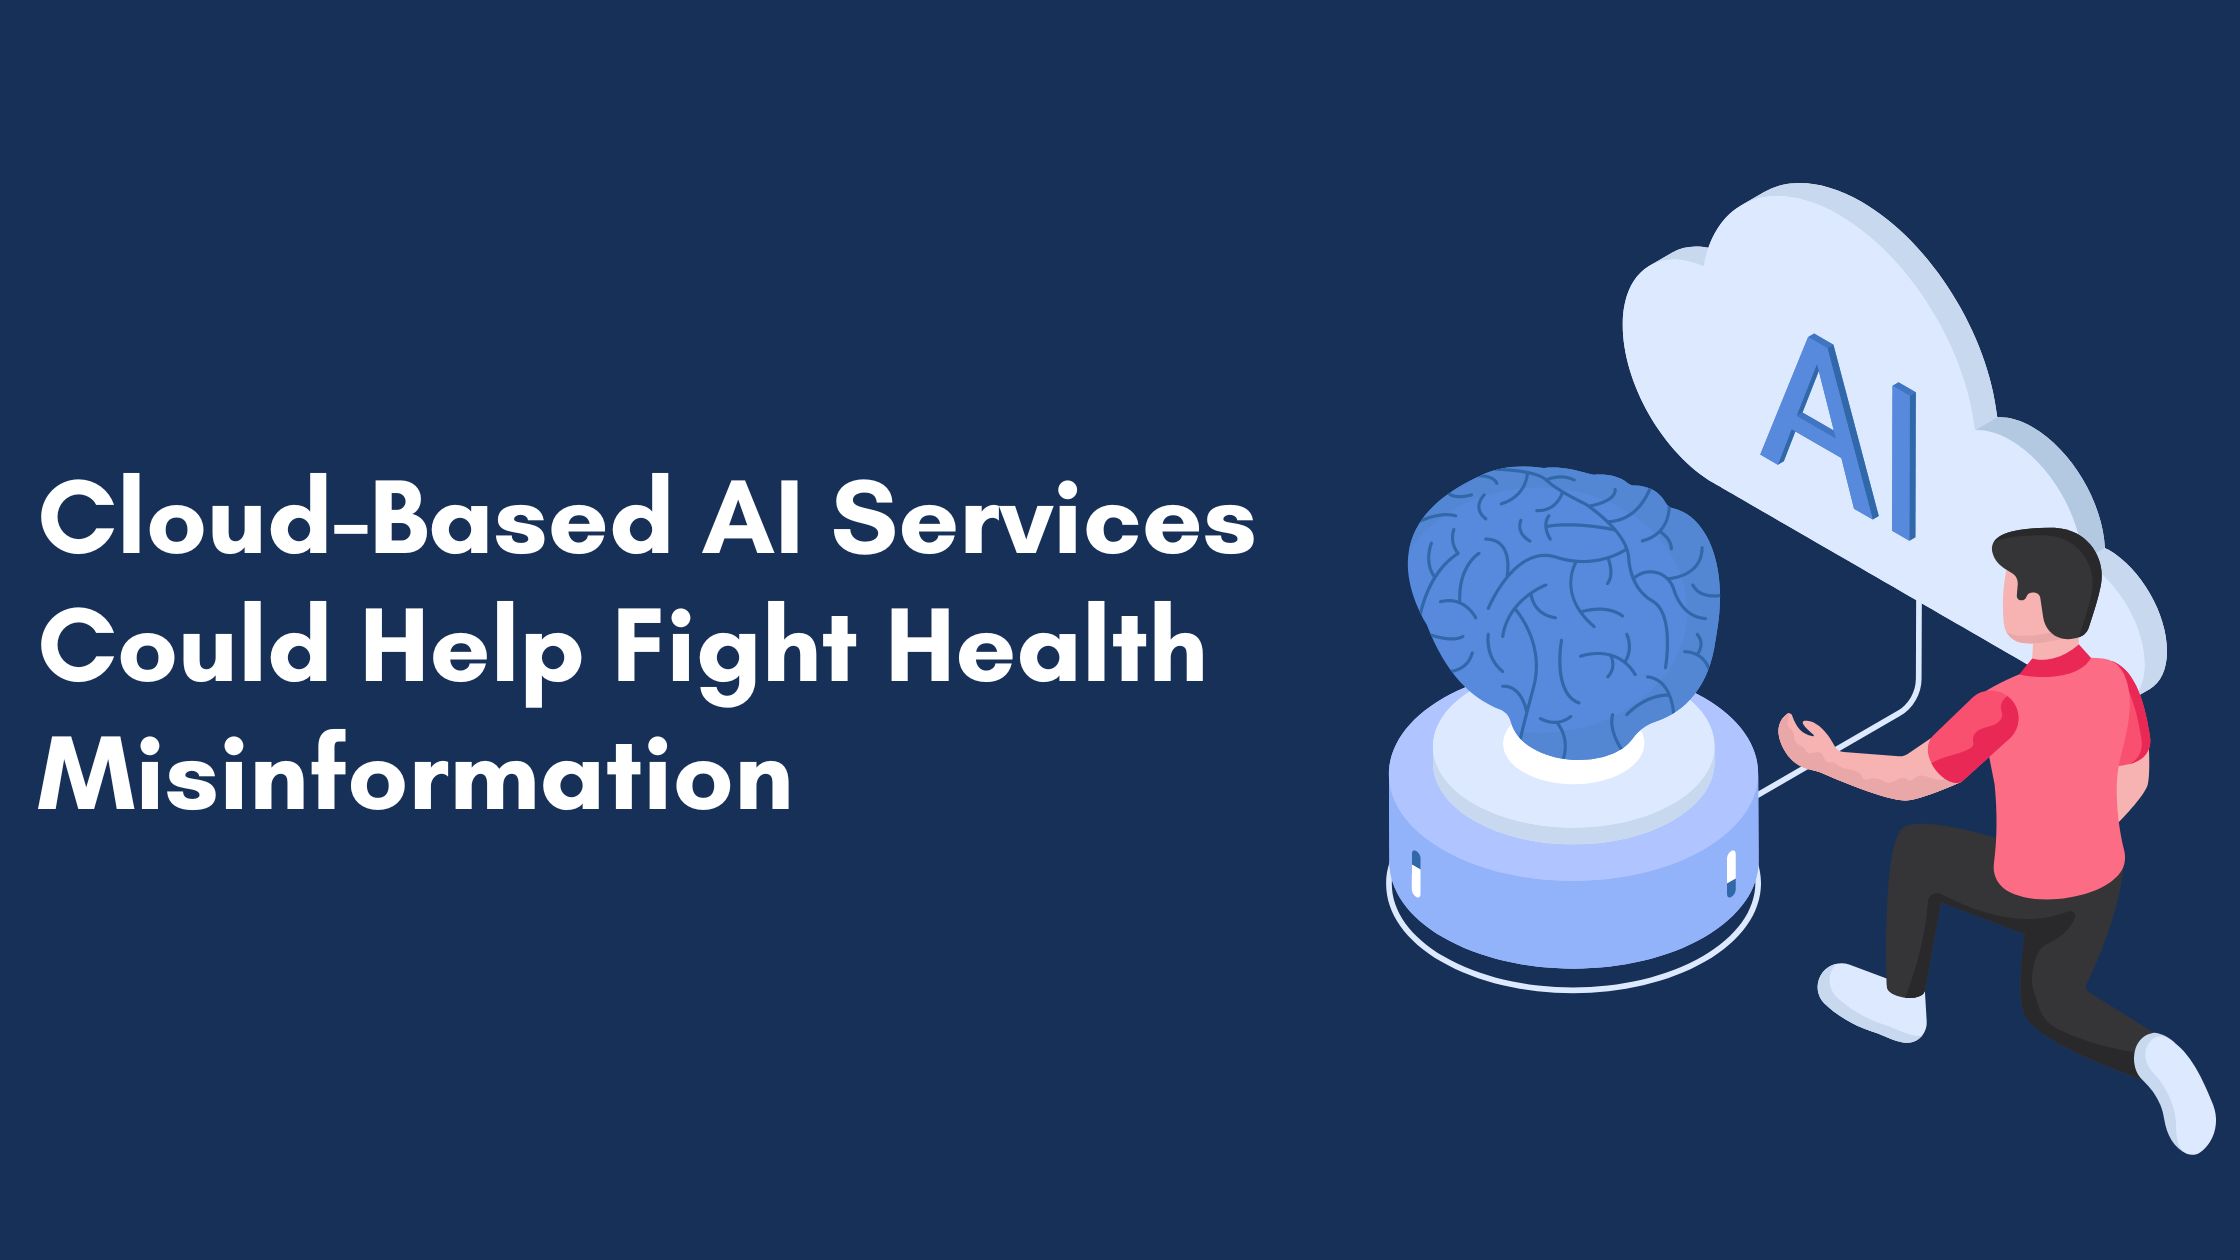 Cloud-based AI services could help fight health misinformation